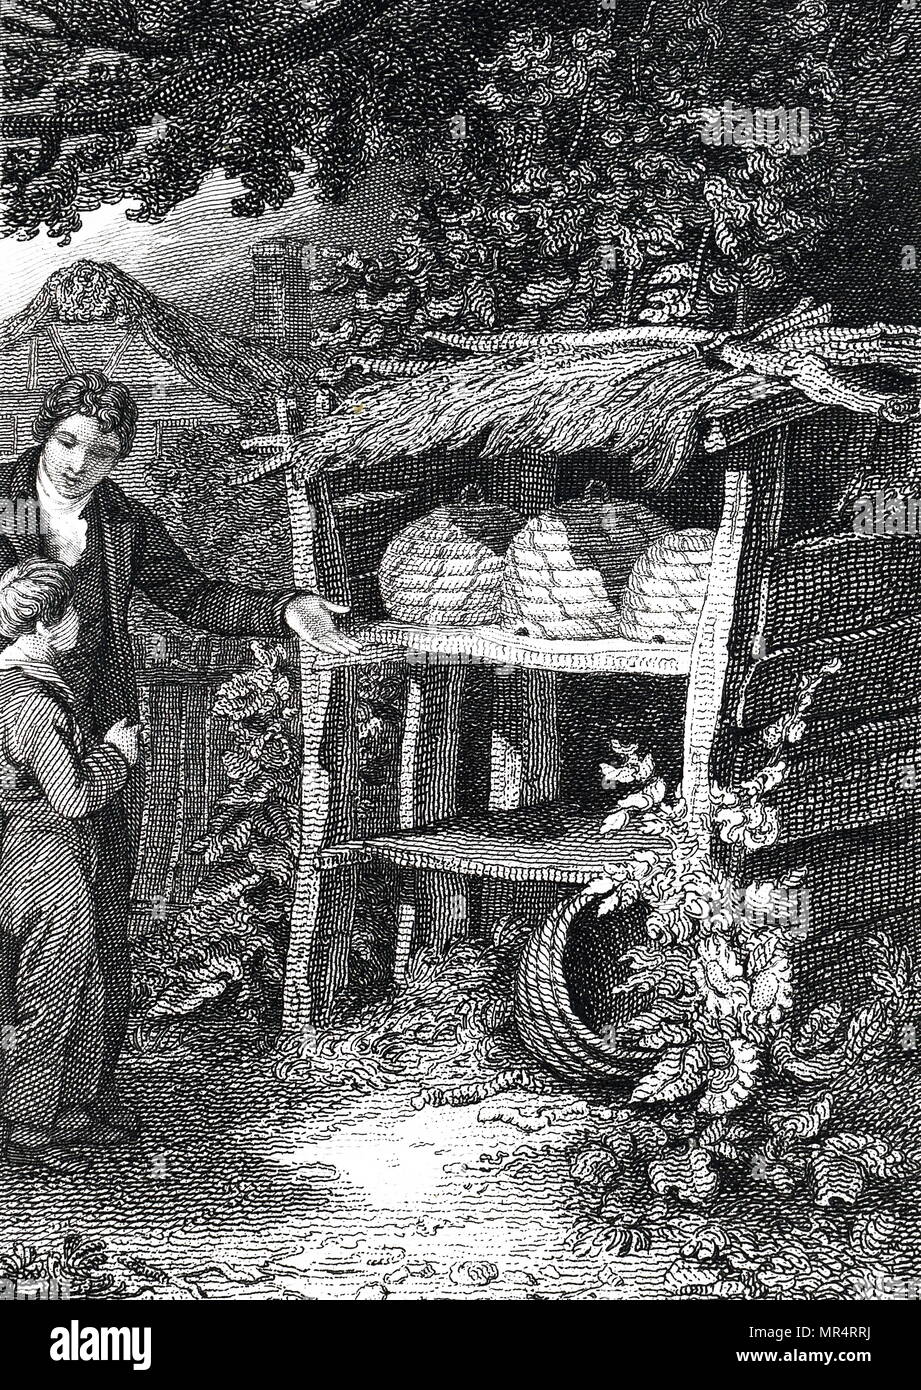 Engraving depicting a beekeeper standing near straw Beehives which are kept under a thatched wooden shelter. Engraved by John Romney (1785-1863) an English artist. Dated 19th century Stock Photo